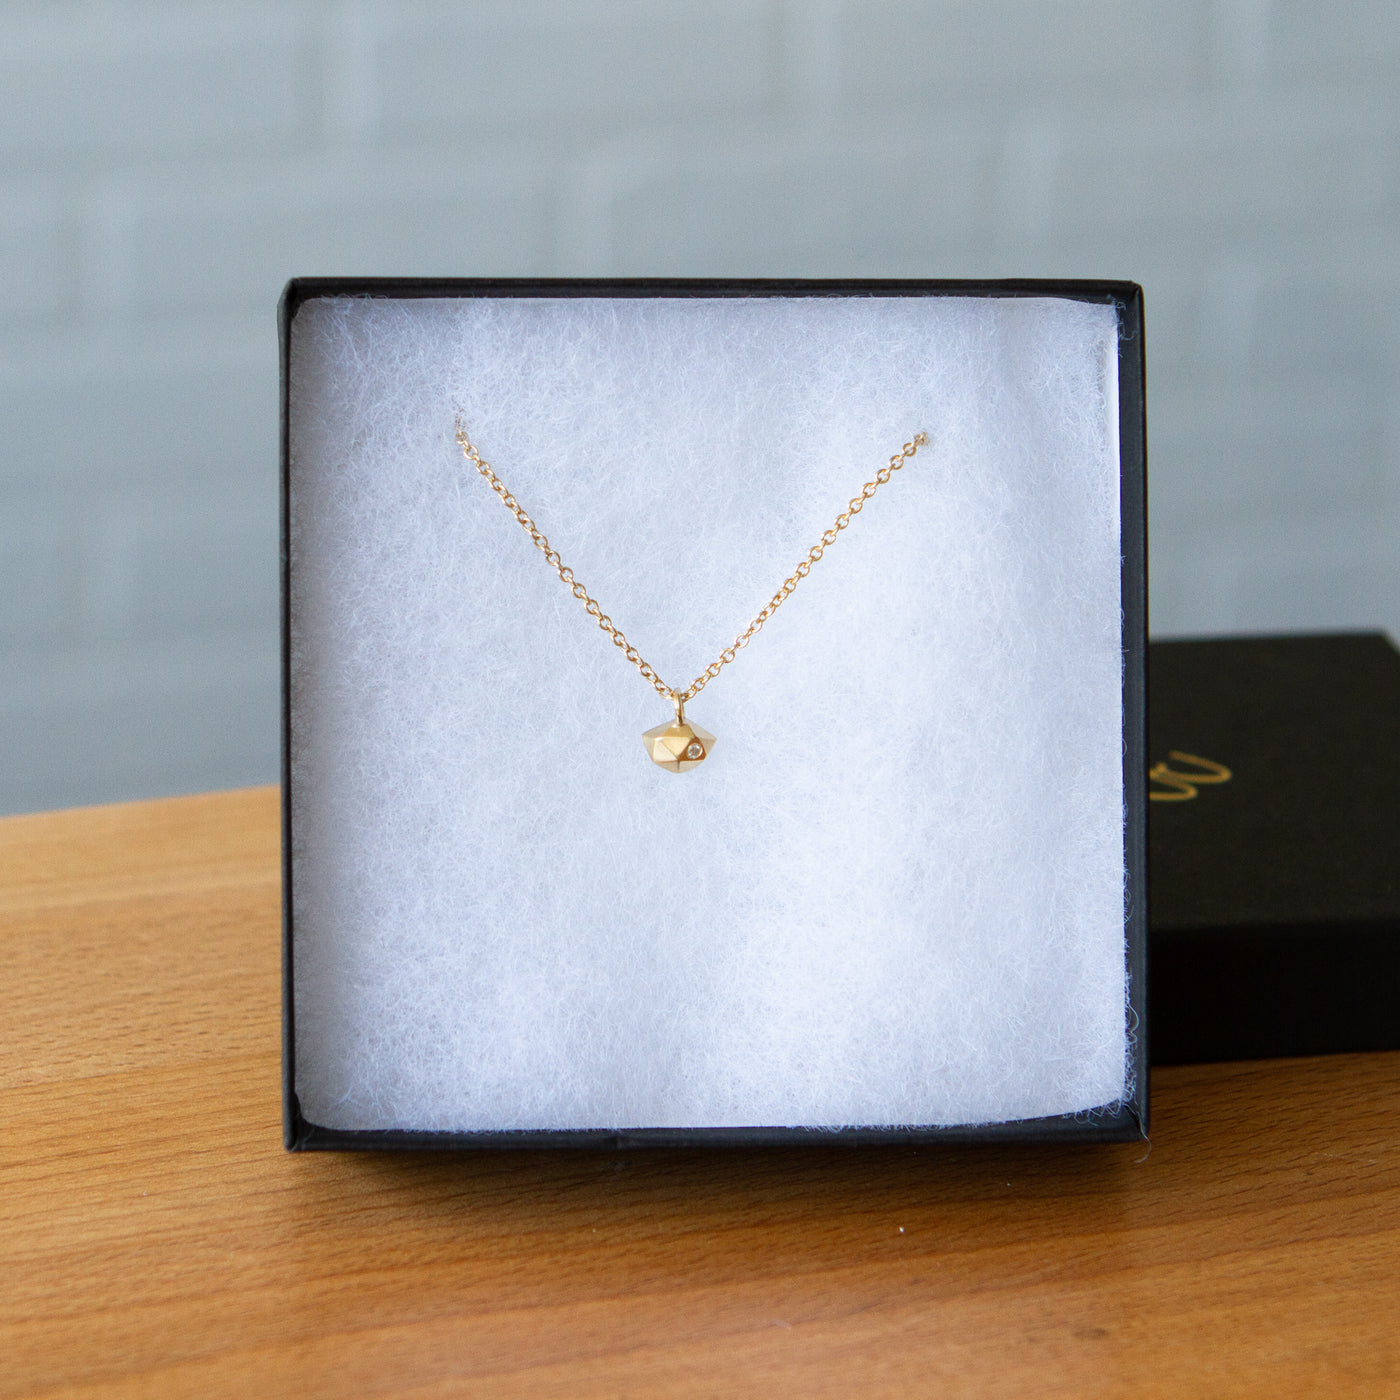 Vermeil Tiny Fragment Diamond Necklace by Corey Egan in a gift box